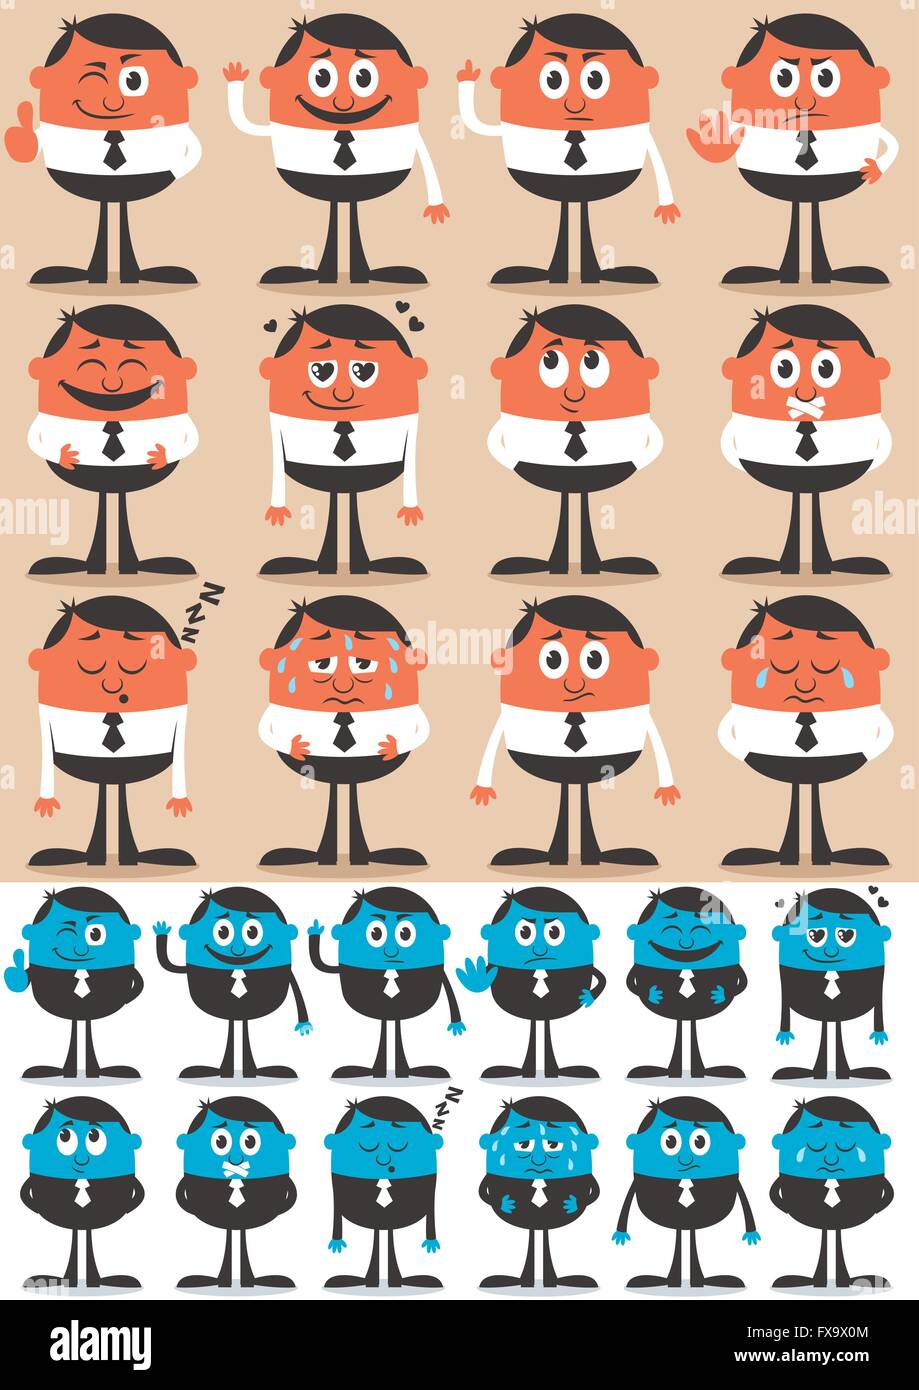 Retro businessman character in 12 different emotions, each in 2 versions. Stock Vector